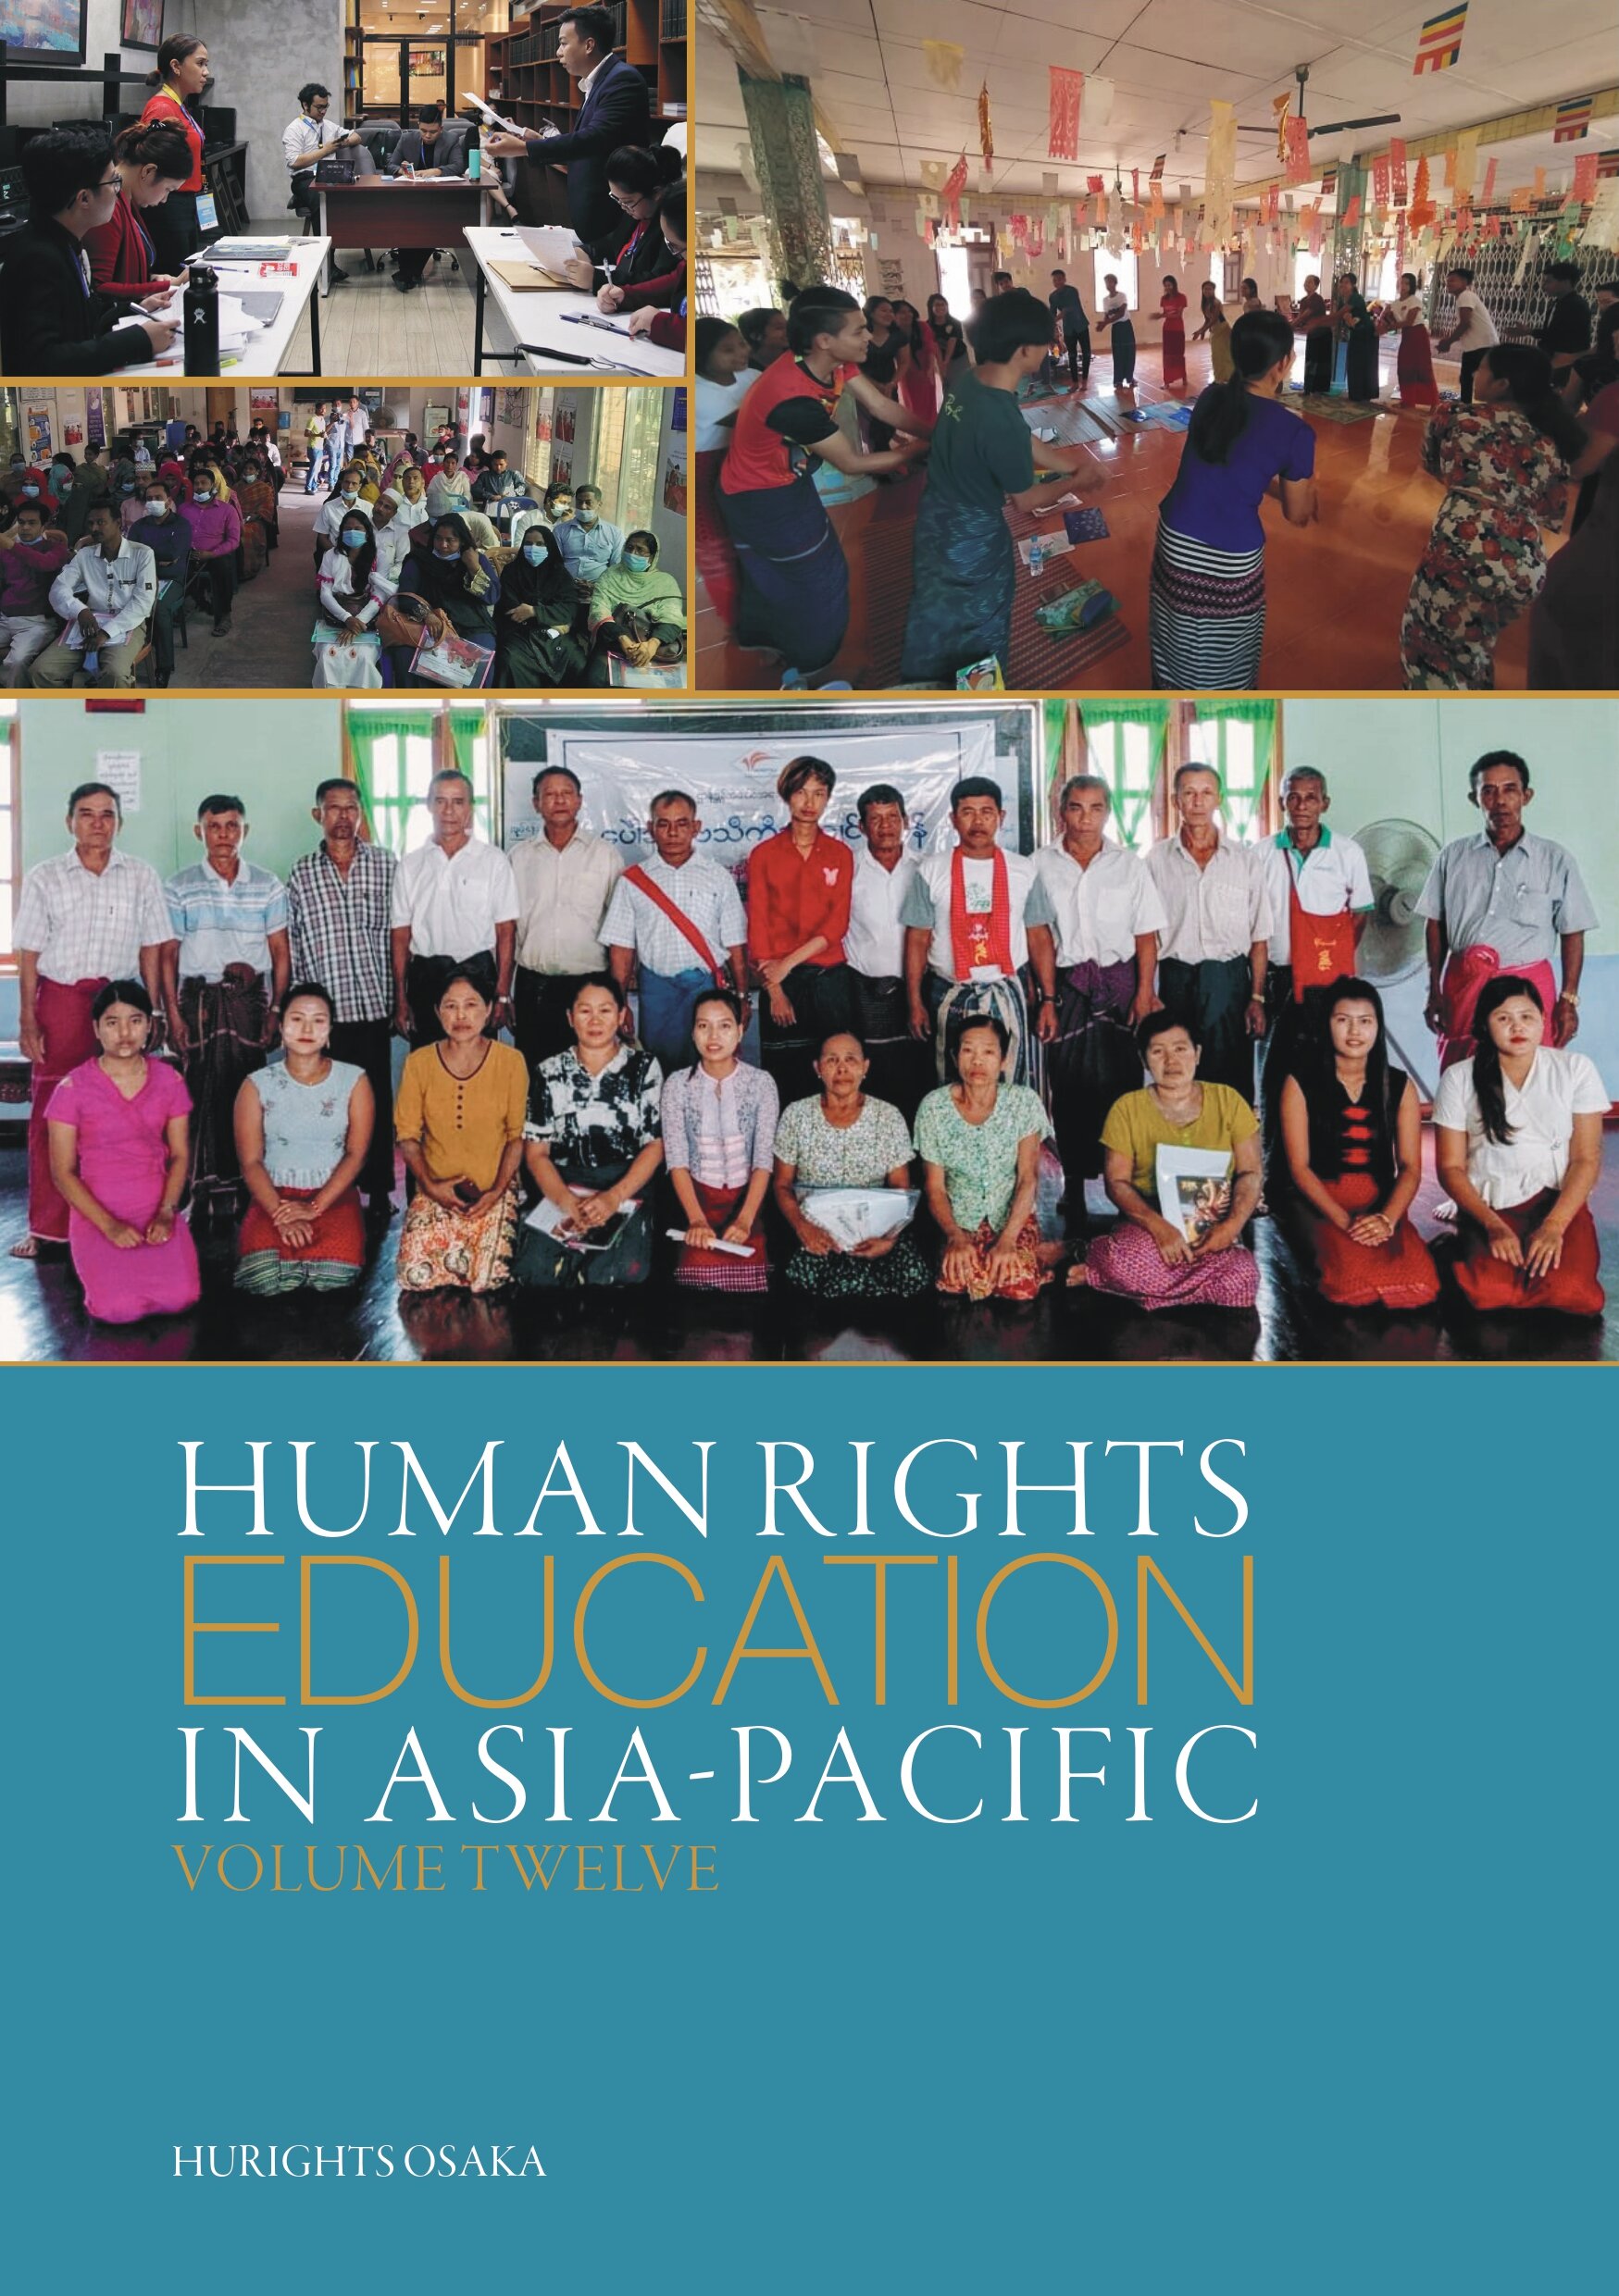 https://www.hurights.or.jp/archives/asia-pacific/hreap_v12_cover.jpg